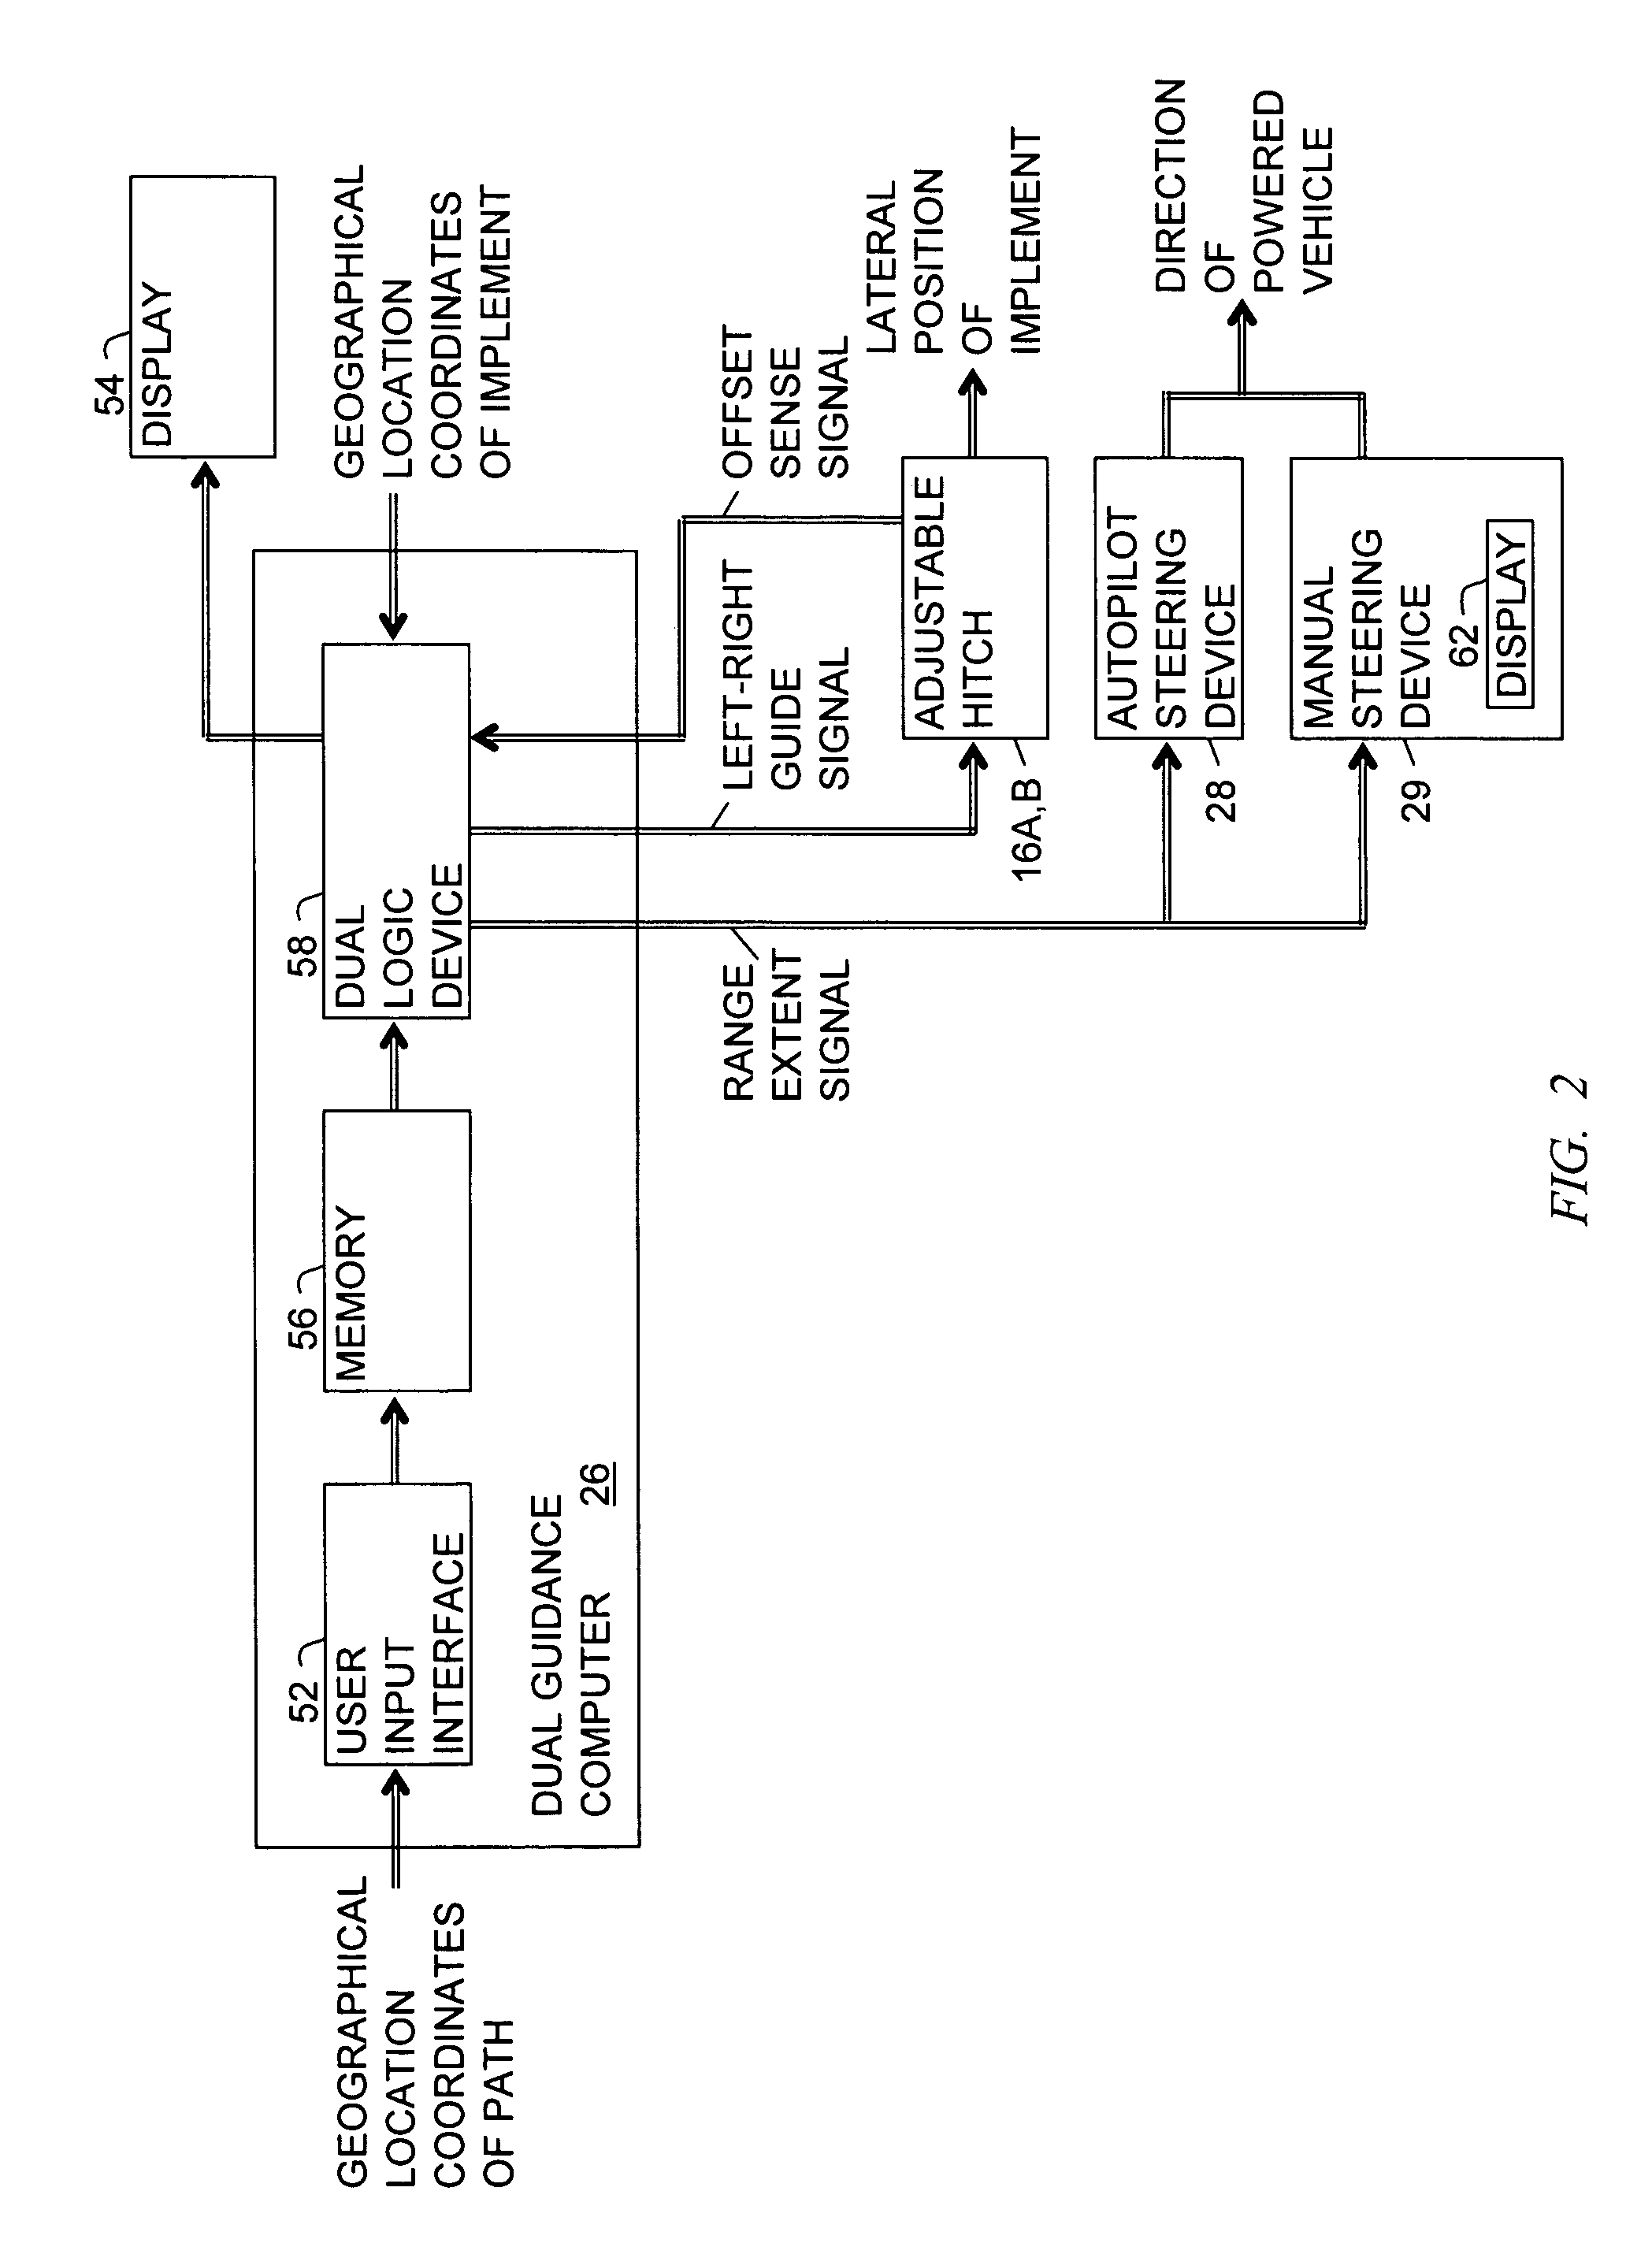 Method and apparatus for steering a farm implement to a path